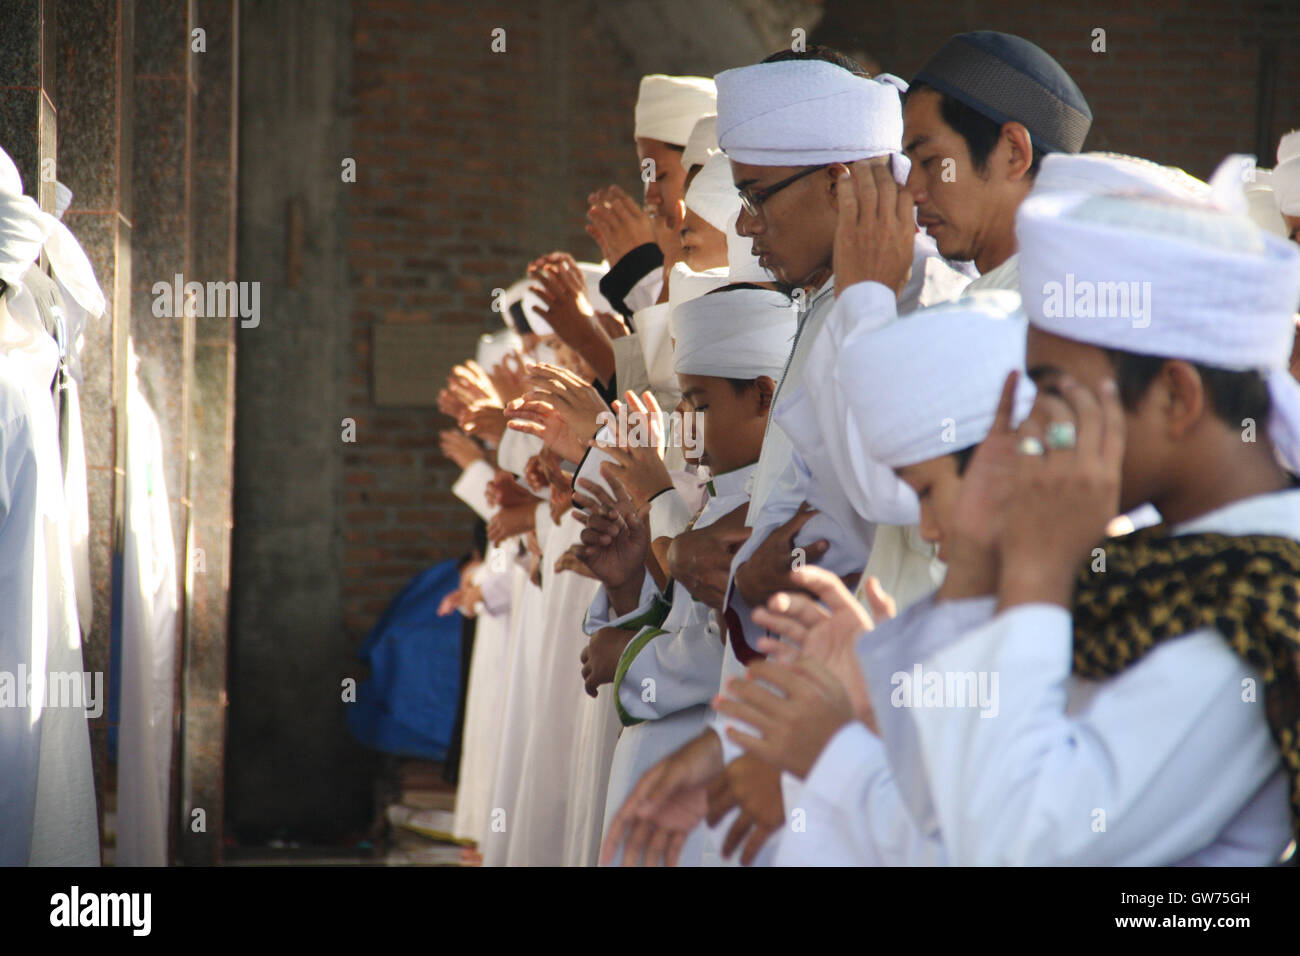 Medan, North Sumatra, Indonesia. 12th Sep, 2016. NORTH SUMATRA, INDONESIA - SEPTEMBER 12 : Indonesia muslim pray during the celebration of Eid al-Adha at Al-Mudziri islamic boarding school on September 12, 2016 in Medan, North Sumatra Province, Indonesia. Muslims worldwide celebrate Eid Al-Adha, to commemorate the holy Prophet Ibrahim's (Prophet Abraham) readiness to sacrifice his son as a sign of his obedience to God, during which they sacrifice permissible animals, generally goats, sheep, and cows. Eid-al Adha is the one of two most important holidays in the Islamic calendar, with pray Stock Photo